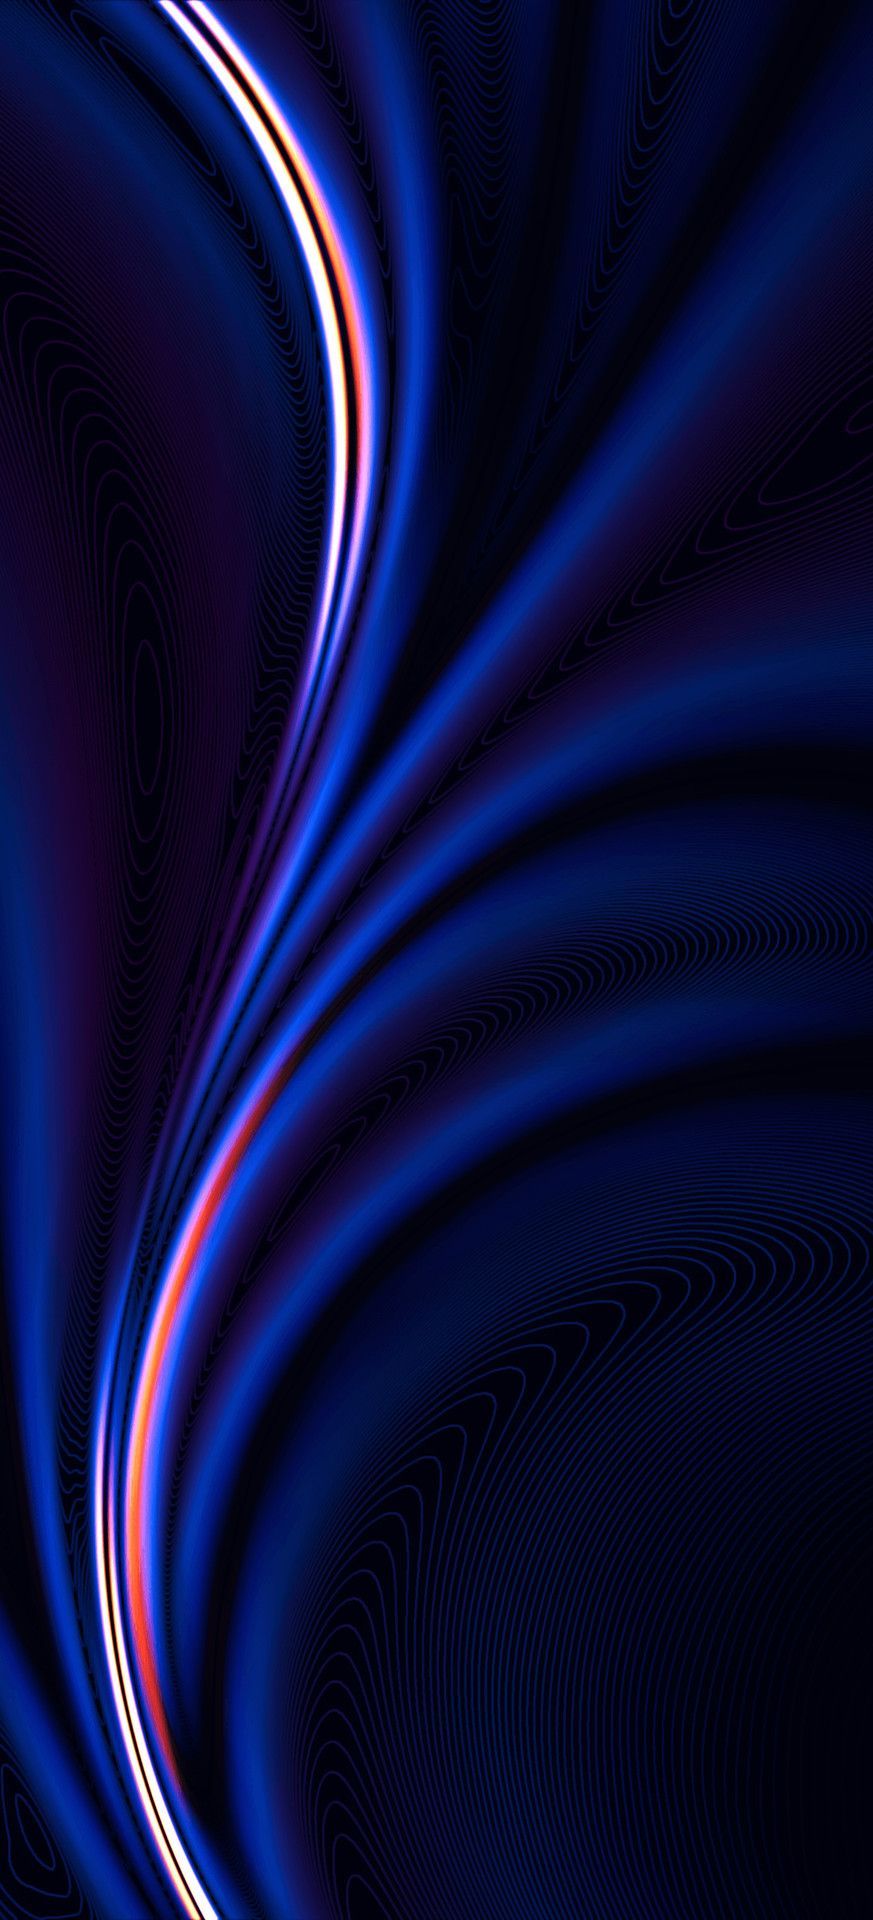 OxygenOS 11 Wallpapers - Wallpaper Cave